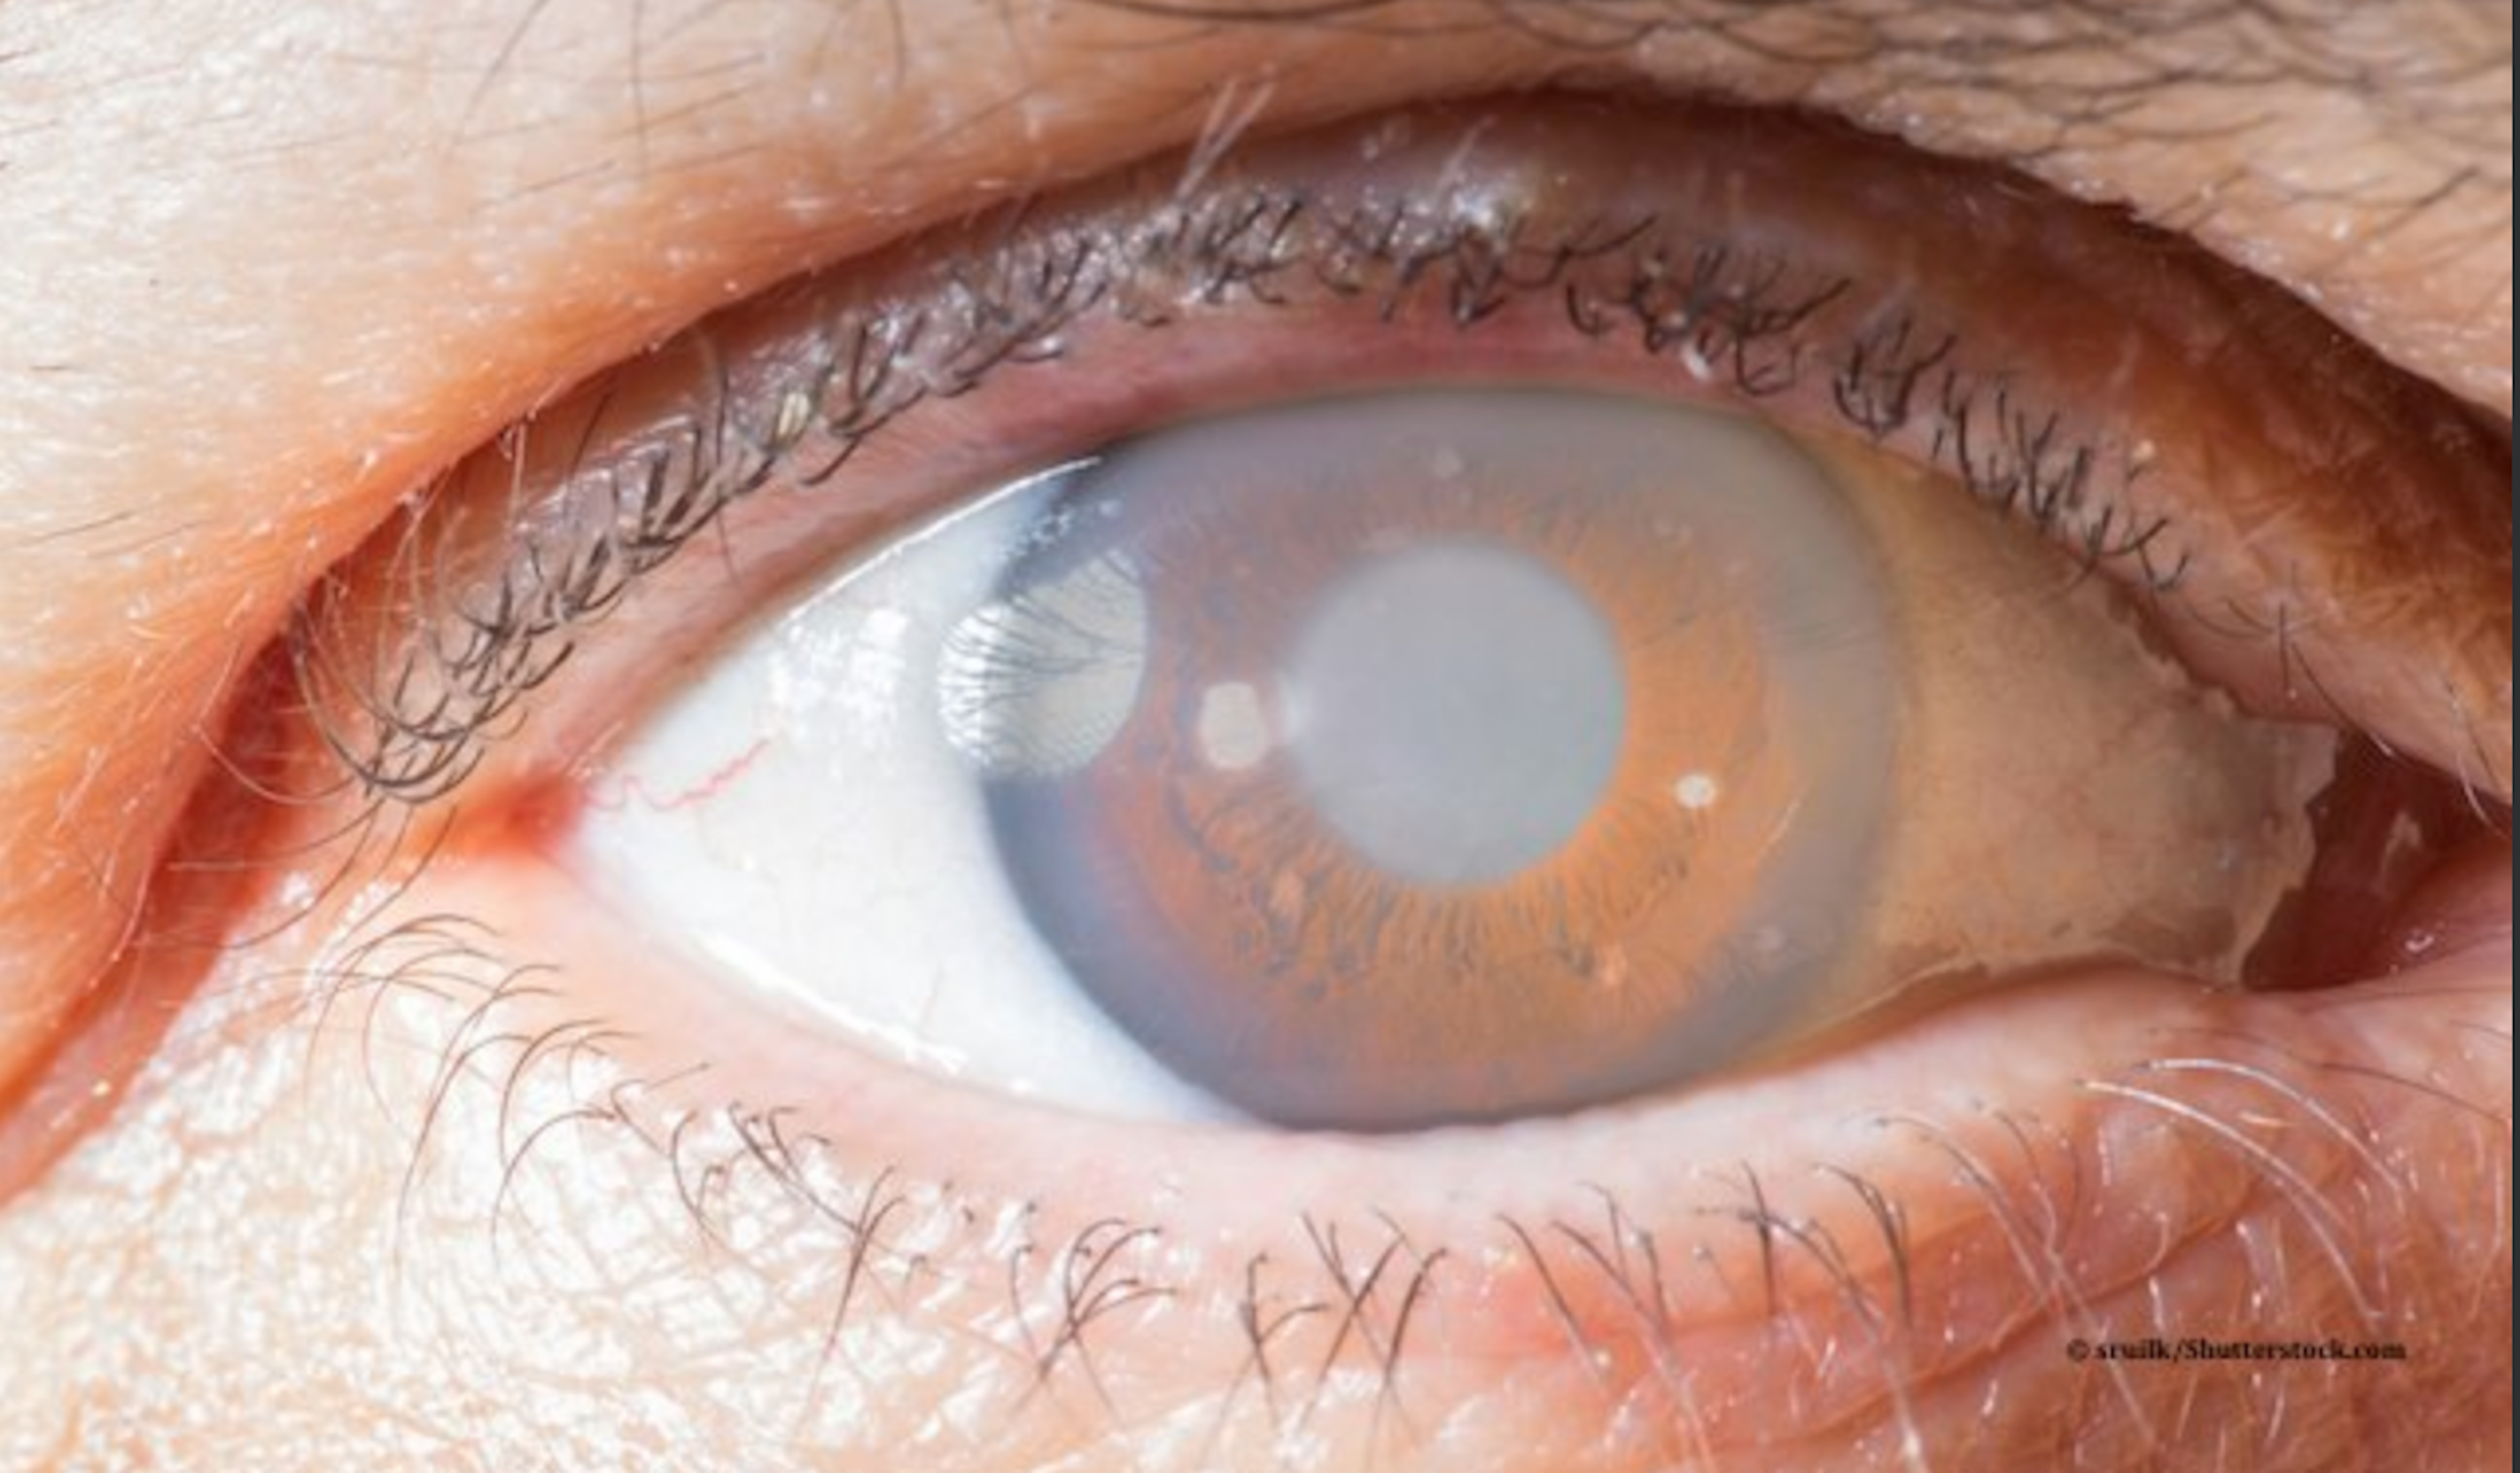 OCT helps diagnose retinoschisis in glaucoma patients 